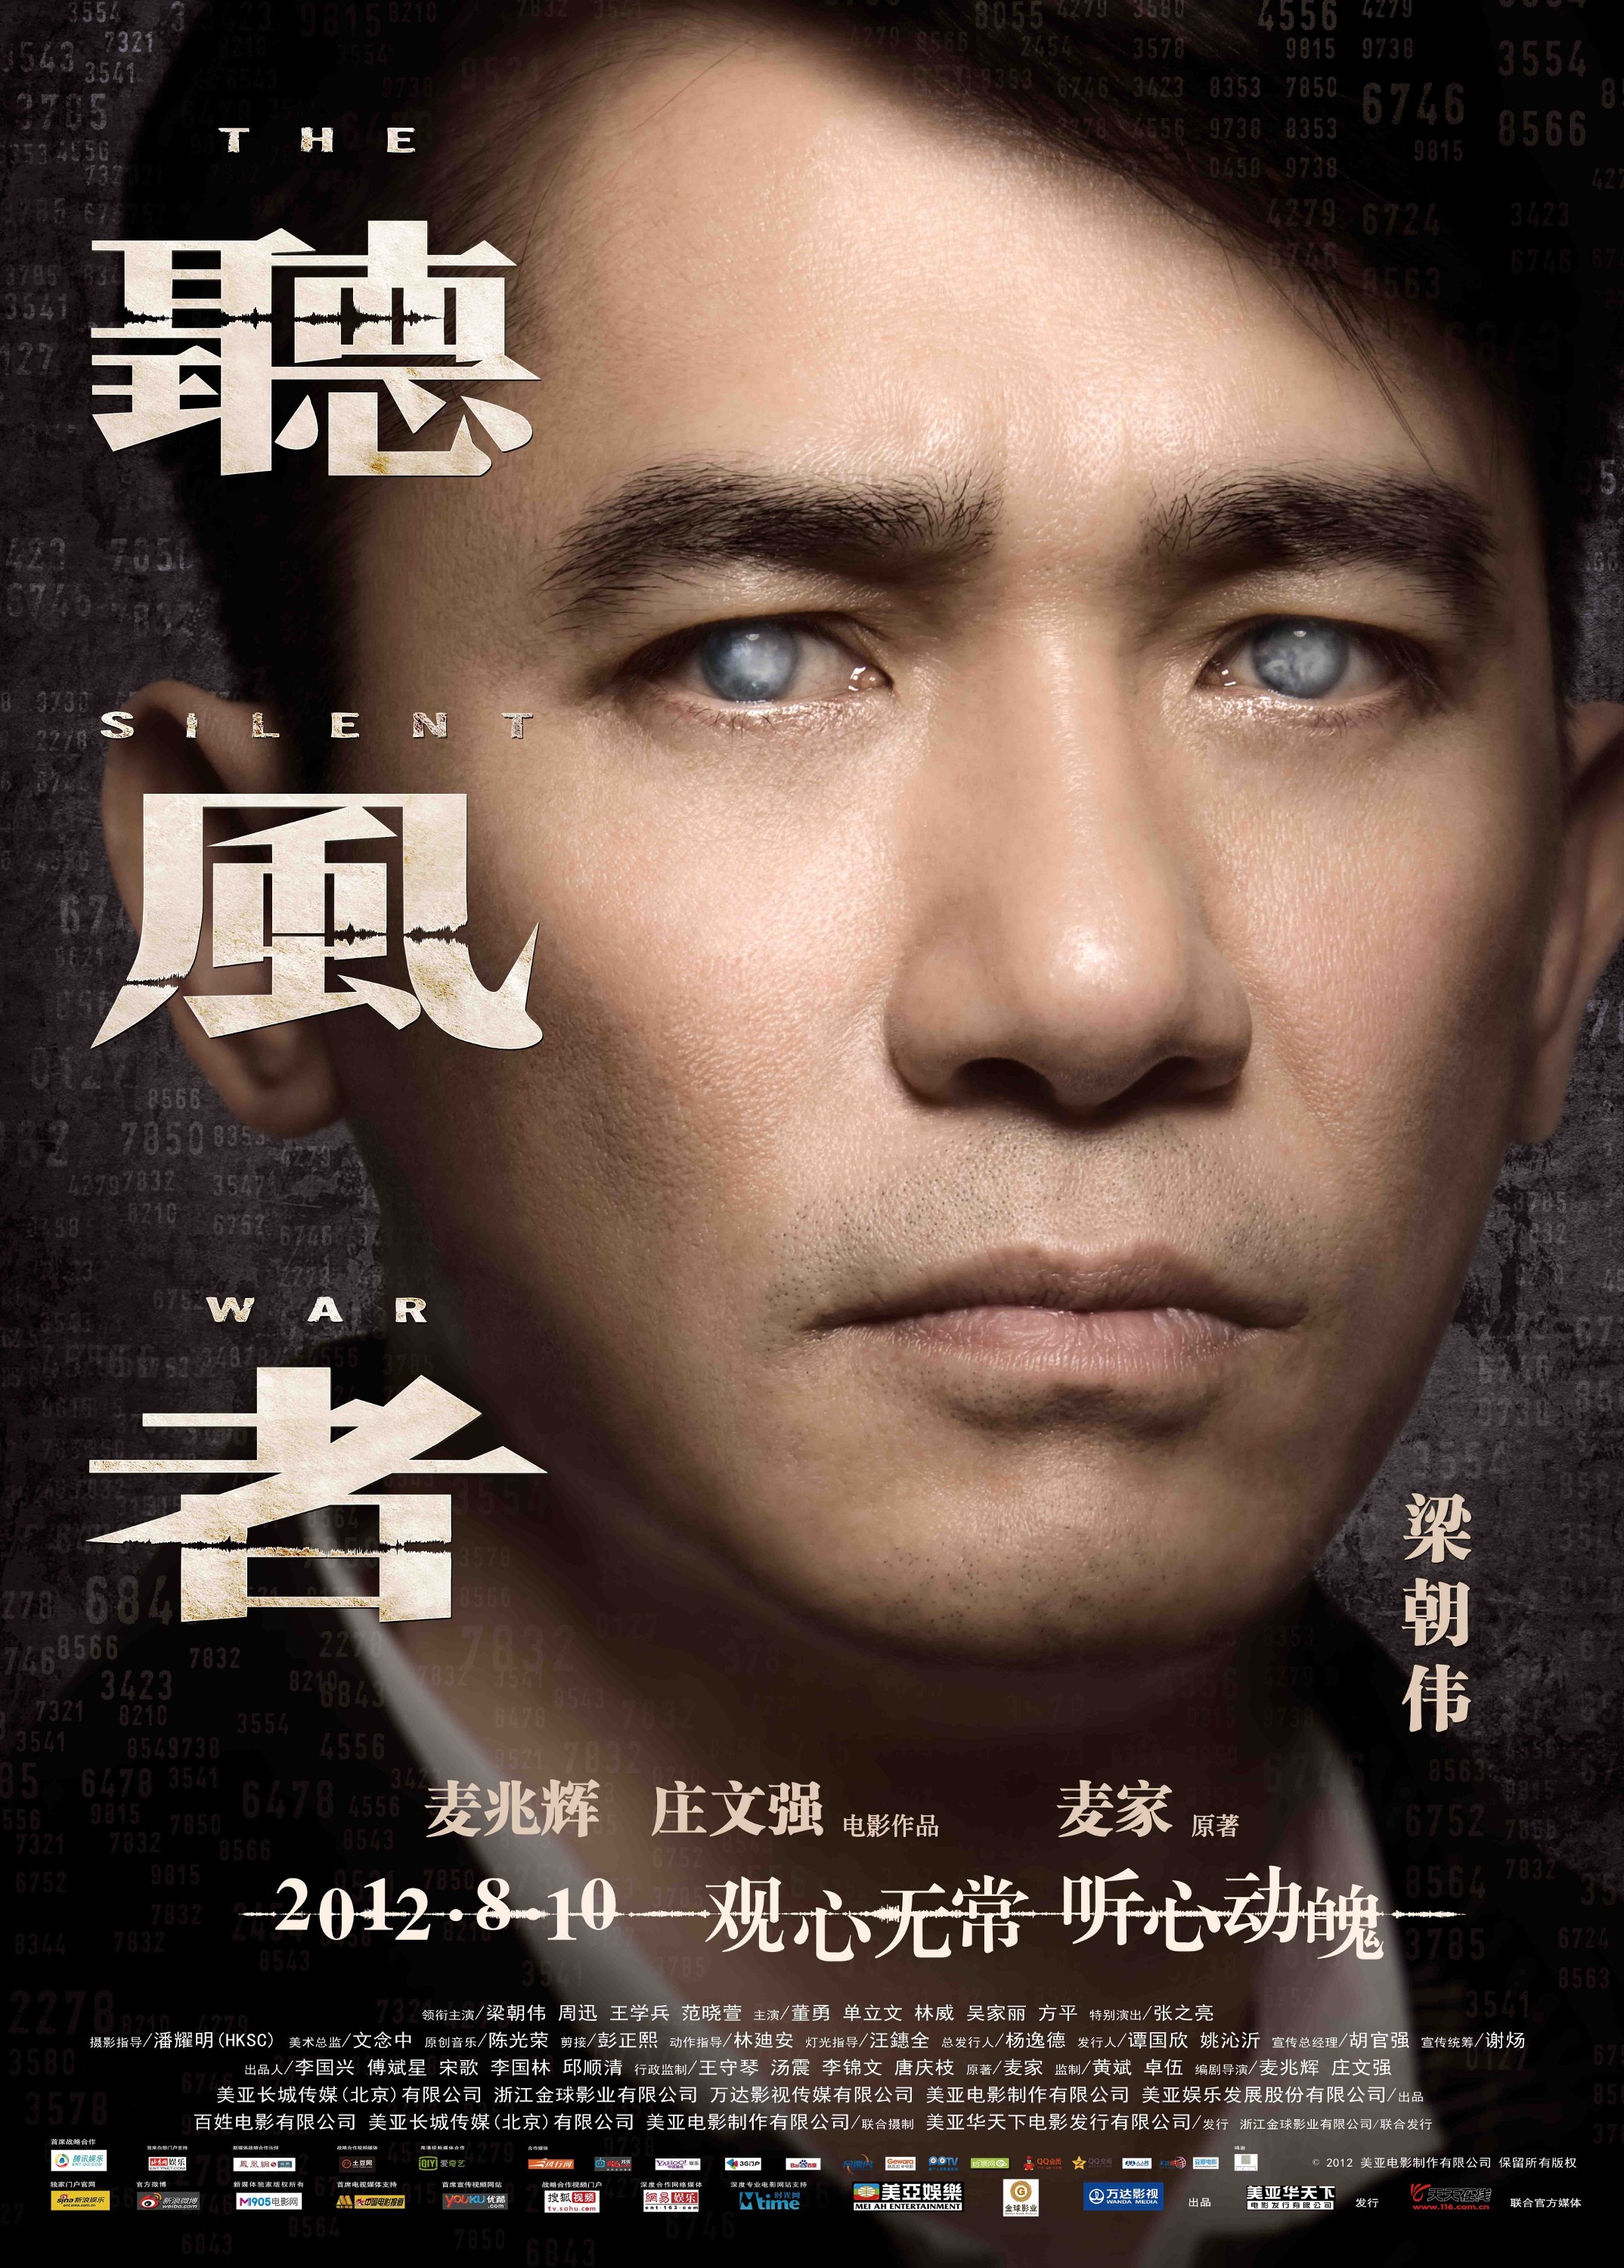 Mega Sized Movie Poster Image for Ting feng zhe (#3 of 9)